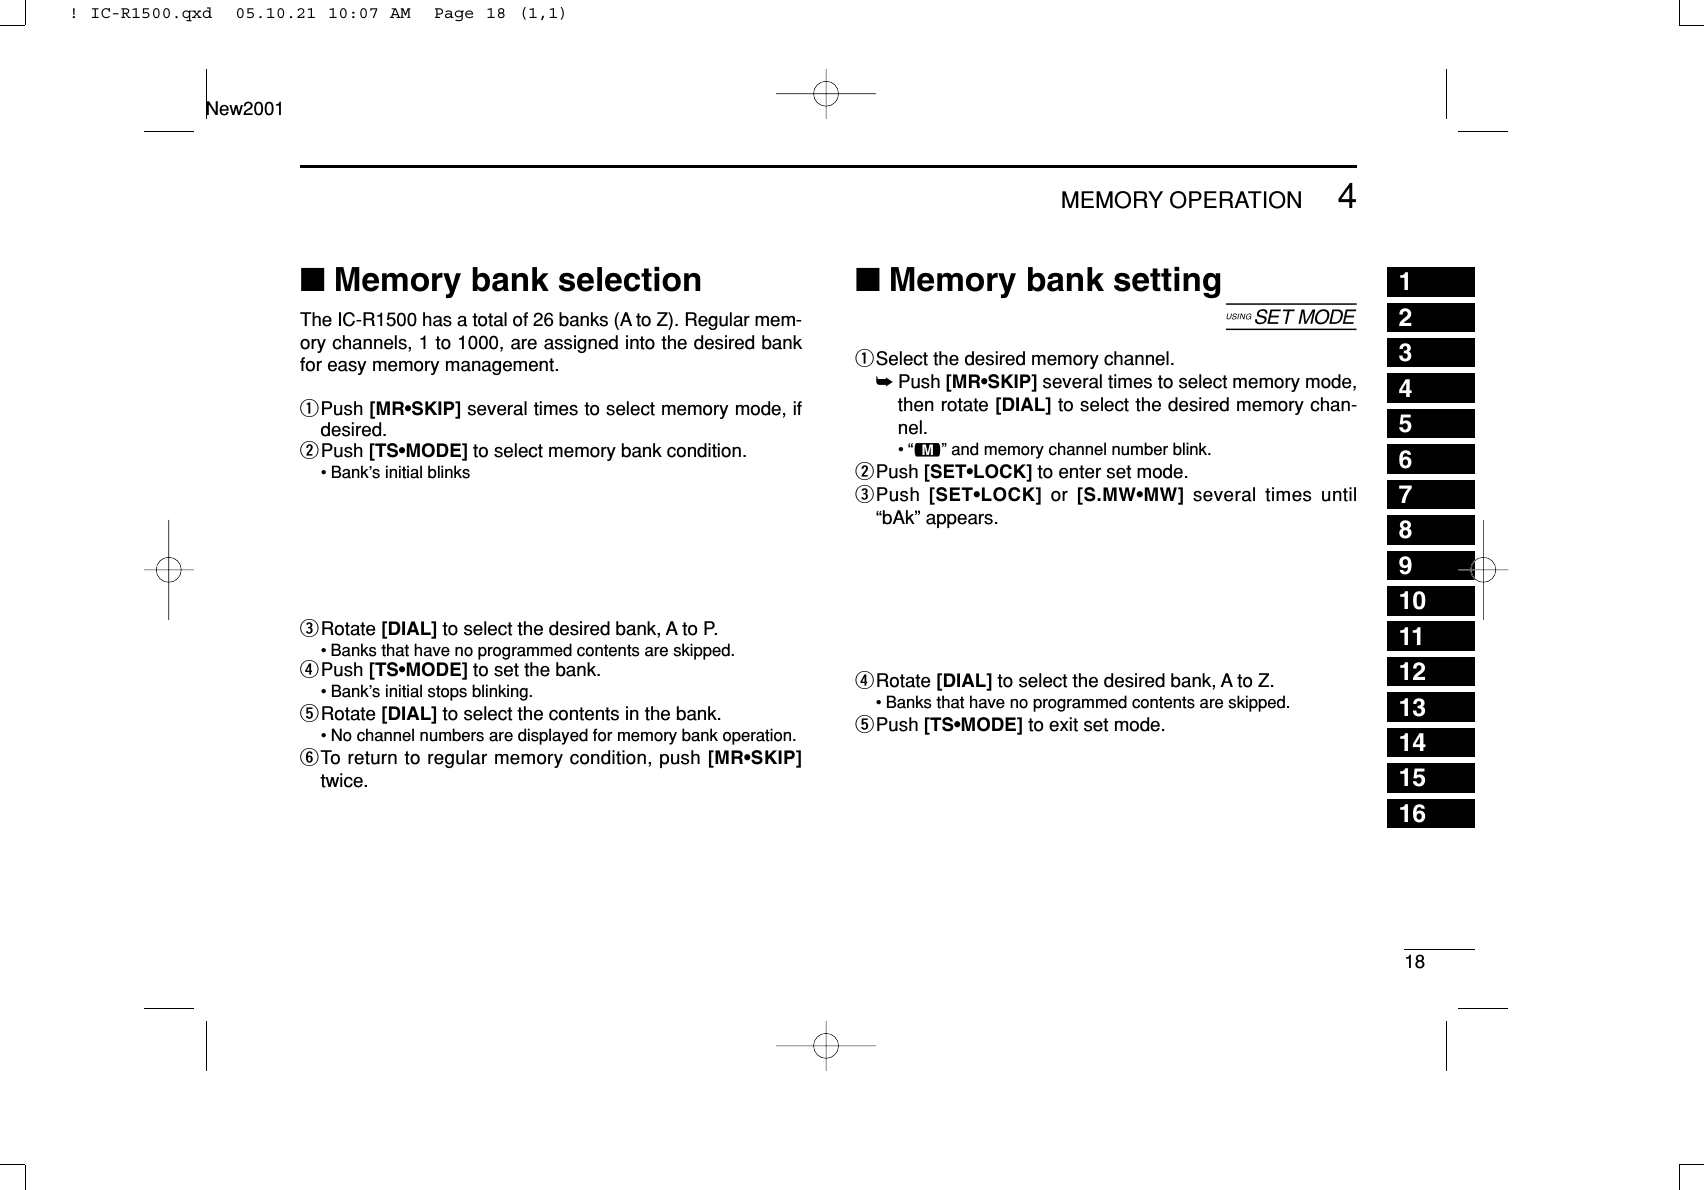 184MEMORY OPERATIONNew200112345678910111213141516■Memory bank selectionThe IC-R1500 has a total of 26 banks (A to Z). Regular mem-ory channels, 1 to 1000, are assigned into the desired bankfor easy memory management.qPush [MR•SKIP] several times to select memory mode, ifdesired.wPush [TS•MODE] to select memory bank condition.• Bank’s initial blinkseRotate [DIAL] to select the desired bank, A to P.• Banks that have no programmed contents are skipped.rPush [TS•MODE] to set the bank.• Bank’s initial stops blinking.tRotate [DIAL] to select the contents in the bank.• No channel numbers are displayed for memory bank operation.yTo return to regular memory condition, push [MR•SKIP]twice.■Memory bank setting[qSelect the desired memory channel.➥Push [MR•SKIP] several times to select memory mode,then rotate [DIAL] to select the desired memory chan-nel.•“!” and memory channel number blink.wPush [SET•LOCK] to enter set mode.ePush  [SET•LOCK] or  [S.MW•MW] several times until“bAk” appears.rRotate [DIAL] to select the desired bank, A to Z.• Banks that have no programmed contents are skipped.tPush [TS•MODE] to exit set mode.! IC-R1500.qxd  05.10.21 10:07 AM  Page 18 (1,1)